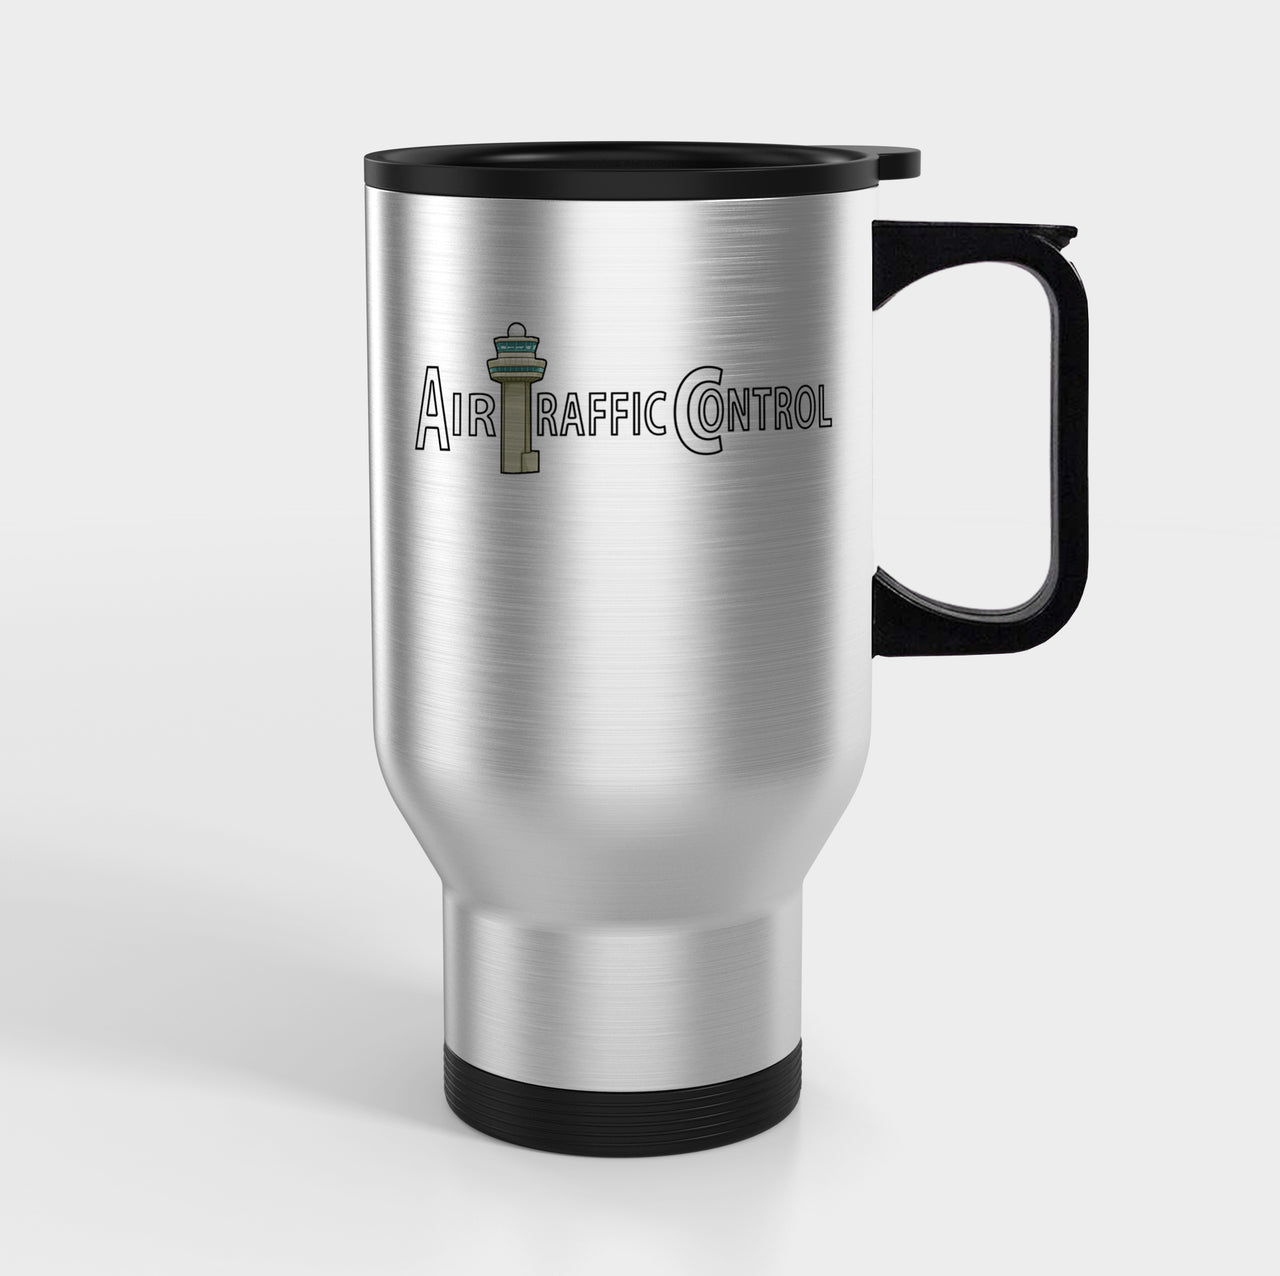 Air Traffic Control Designed Travel Mugs (With Holder)